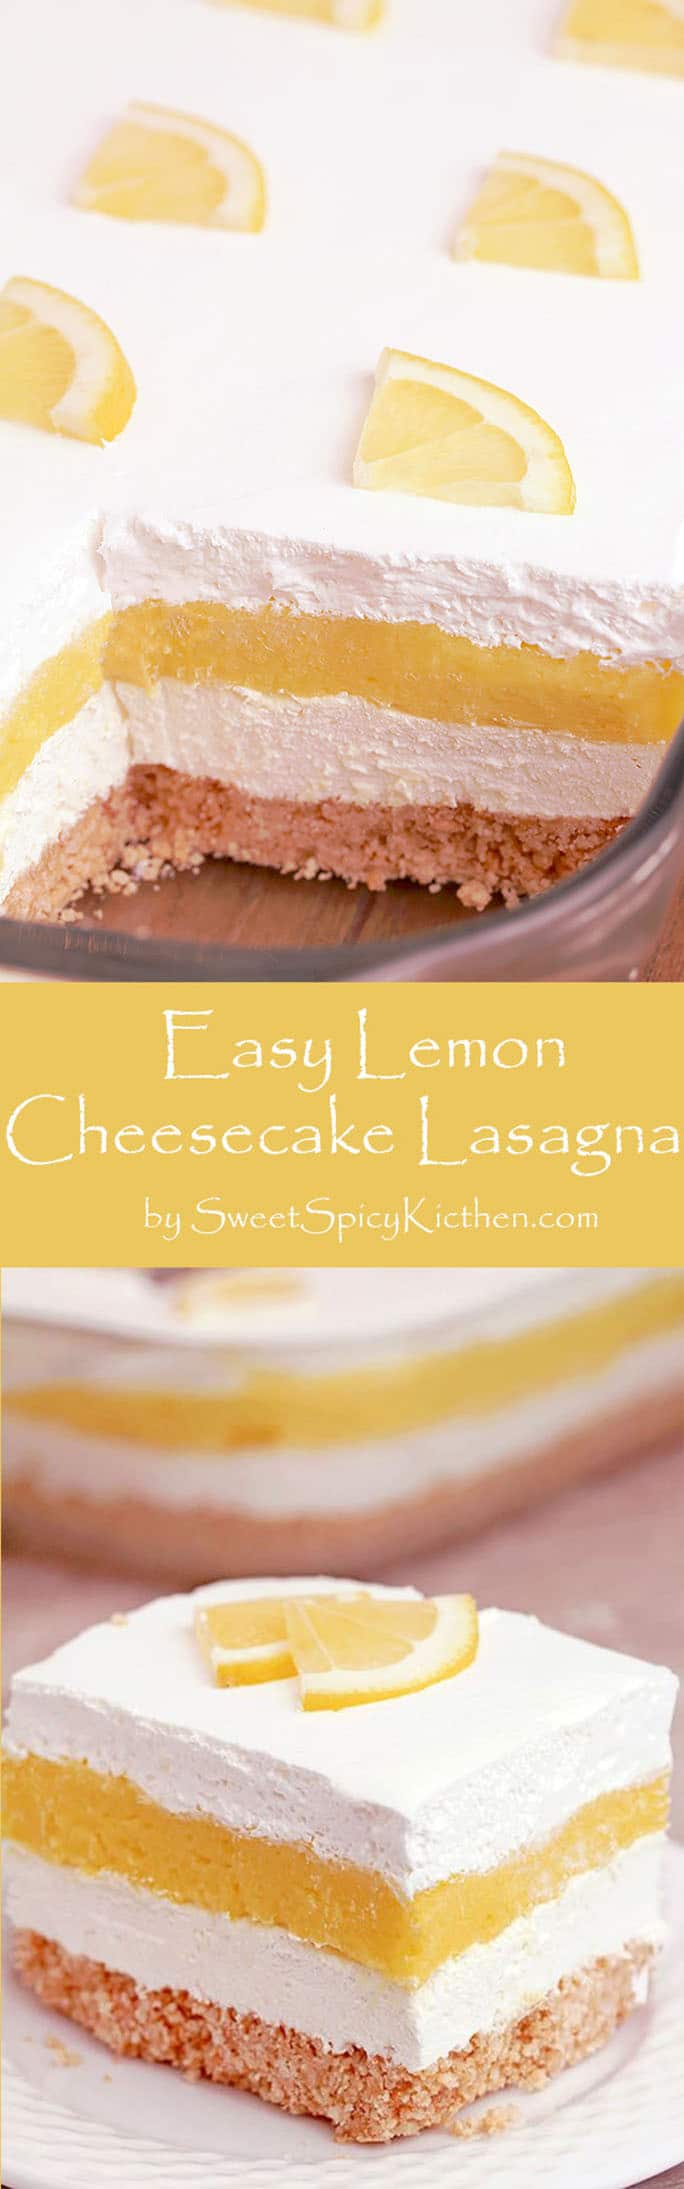 Easy Lemon Cheesecake Lasagna is a quick and simple layered dessert just perfect for Easter. Tasty Golden Oreo base, cheesecake layer, lemon pudding layer and whipped topping on top. It´s so yummy and looks great, too